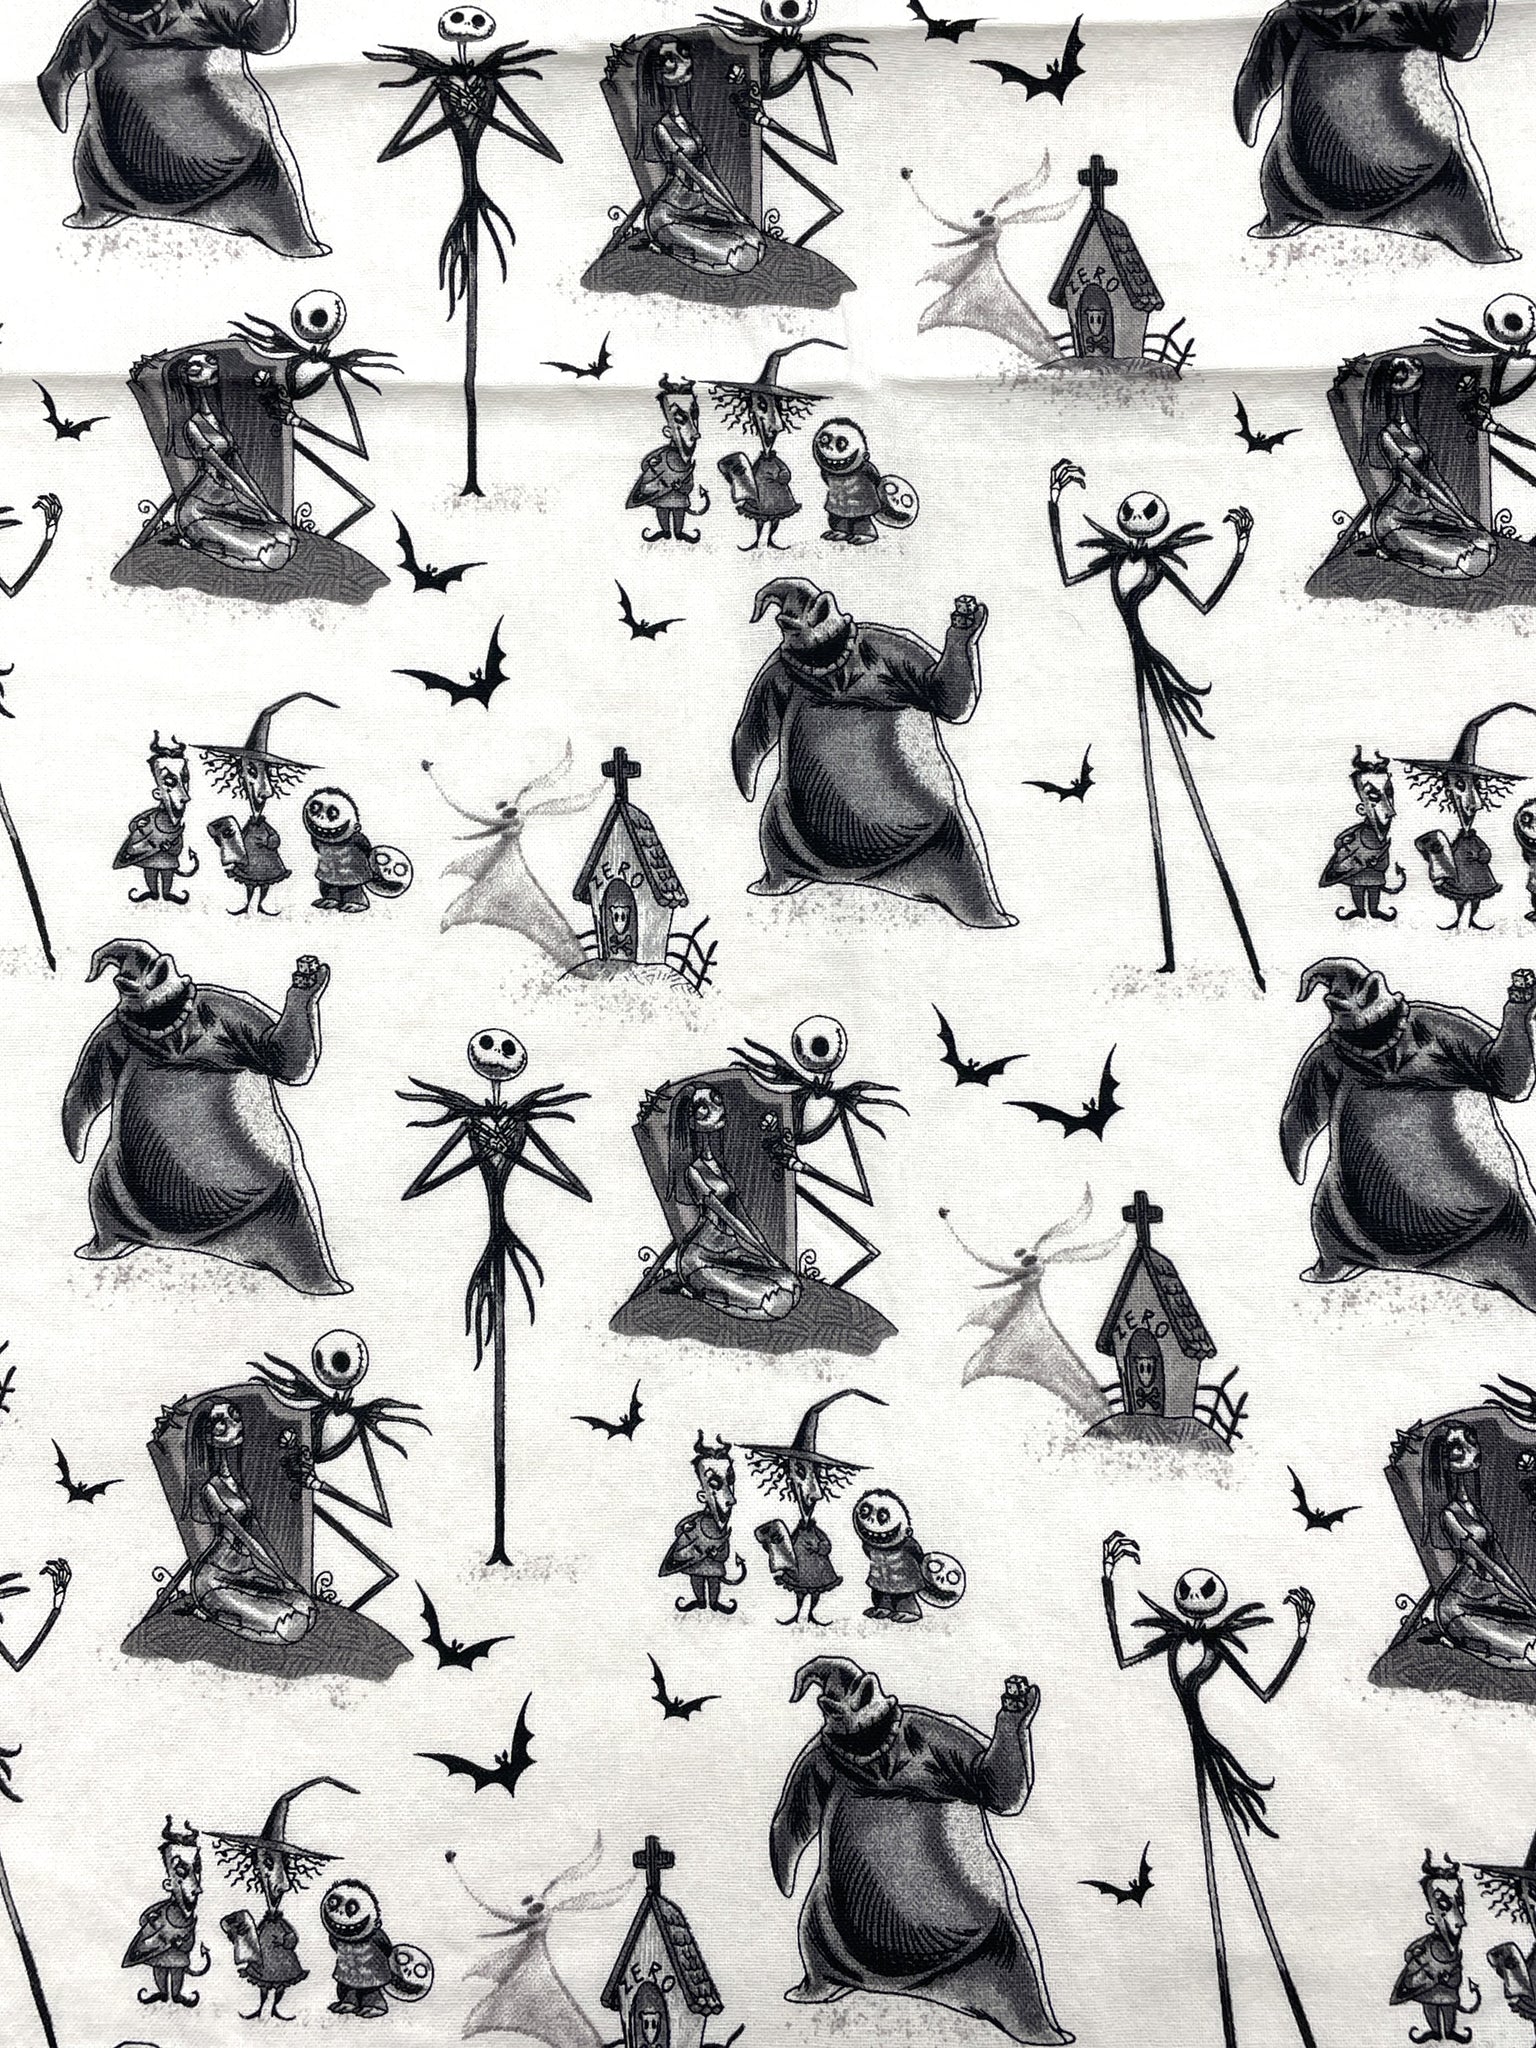 2020 4 YD Quilting Cotton - White with Black and Gray "Nightmare Before Christmas" Characters